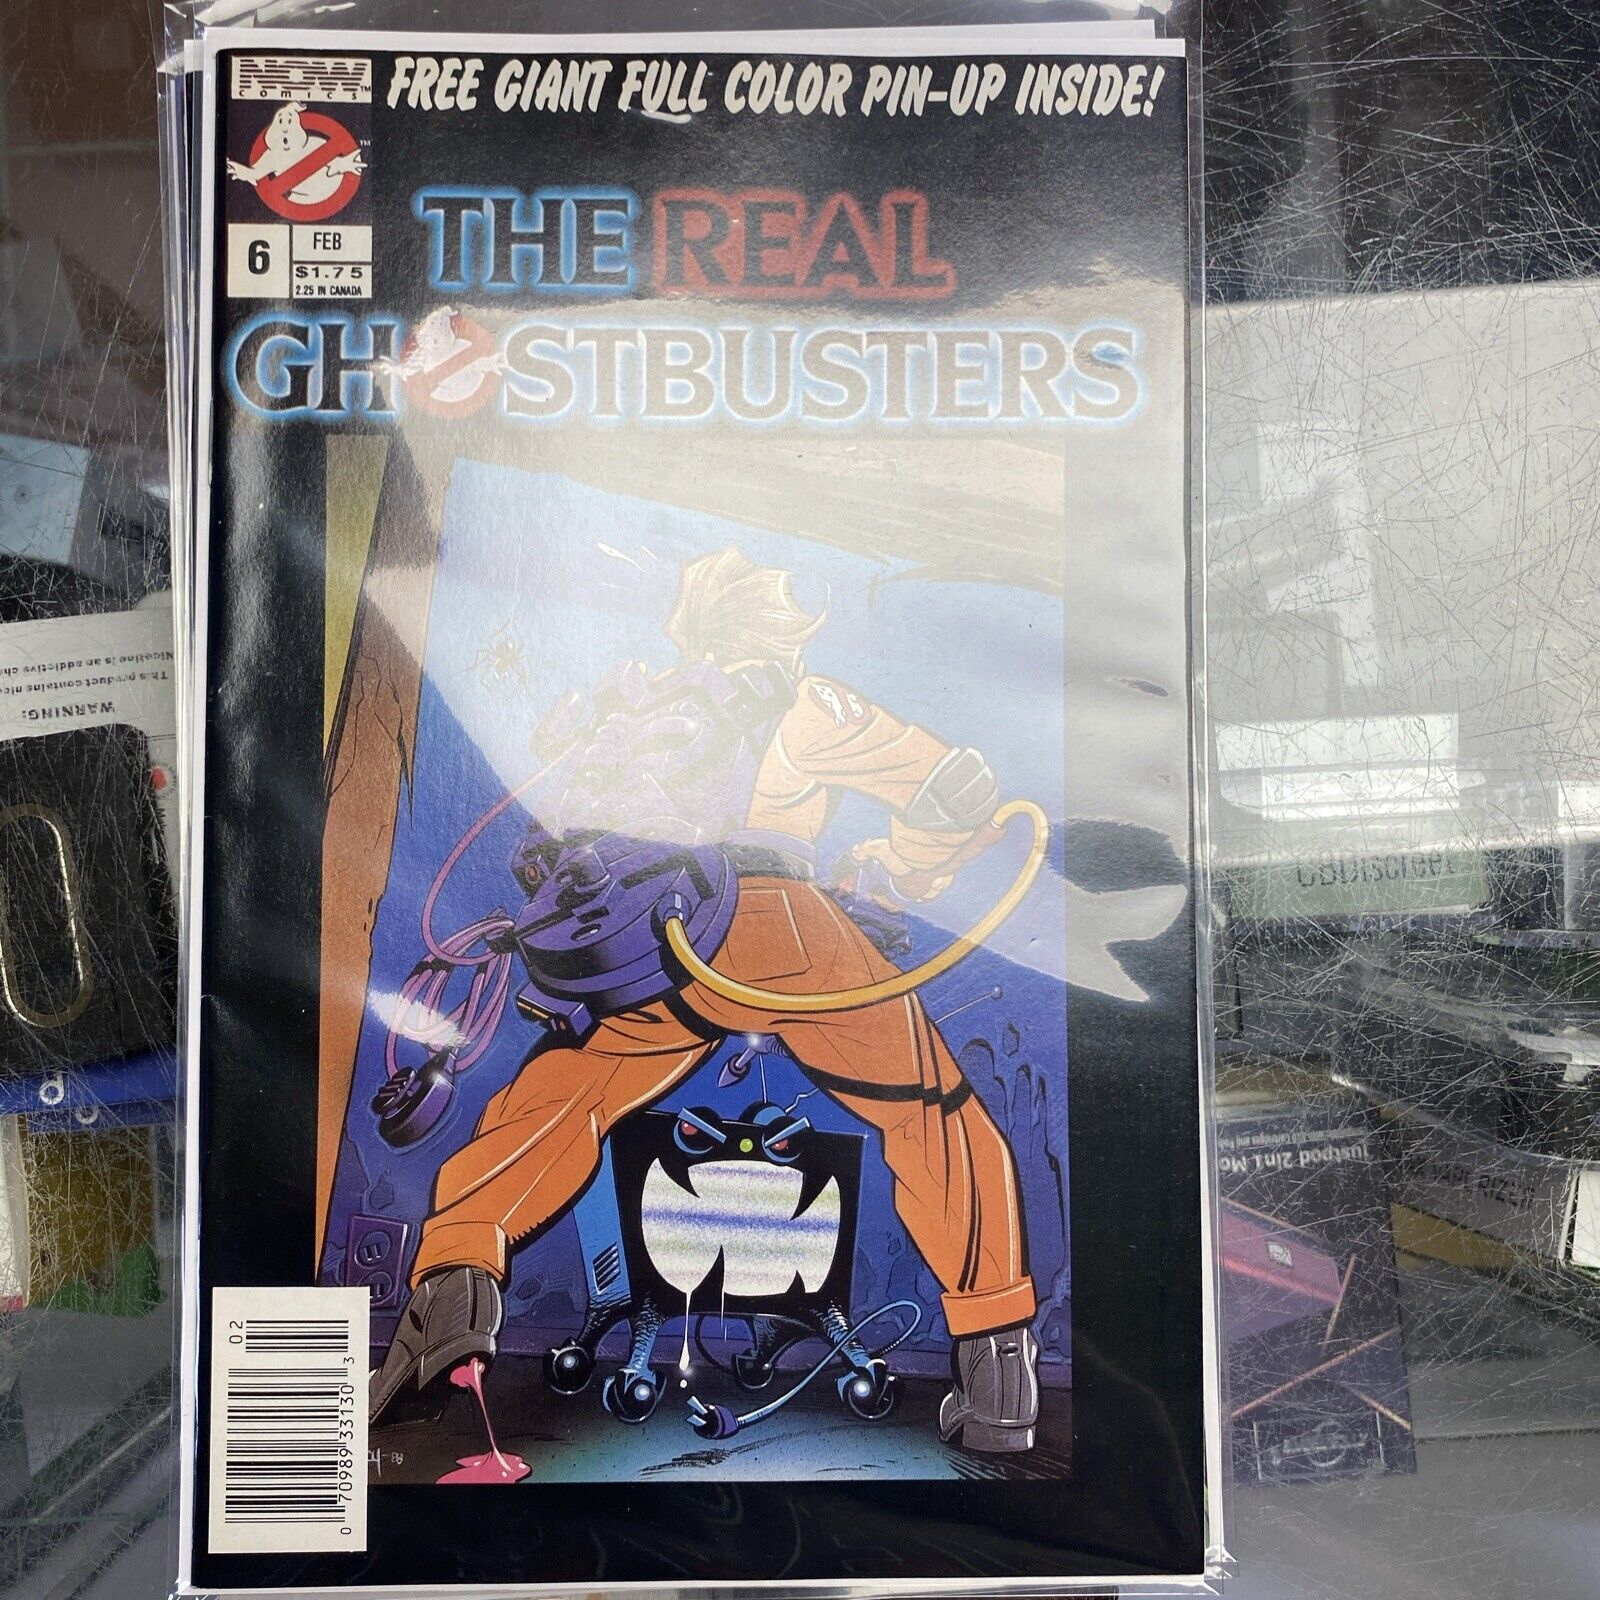 The Real Ghostbusters (Feb/88/#6)